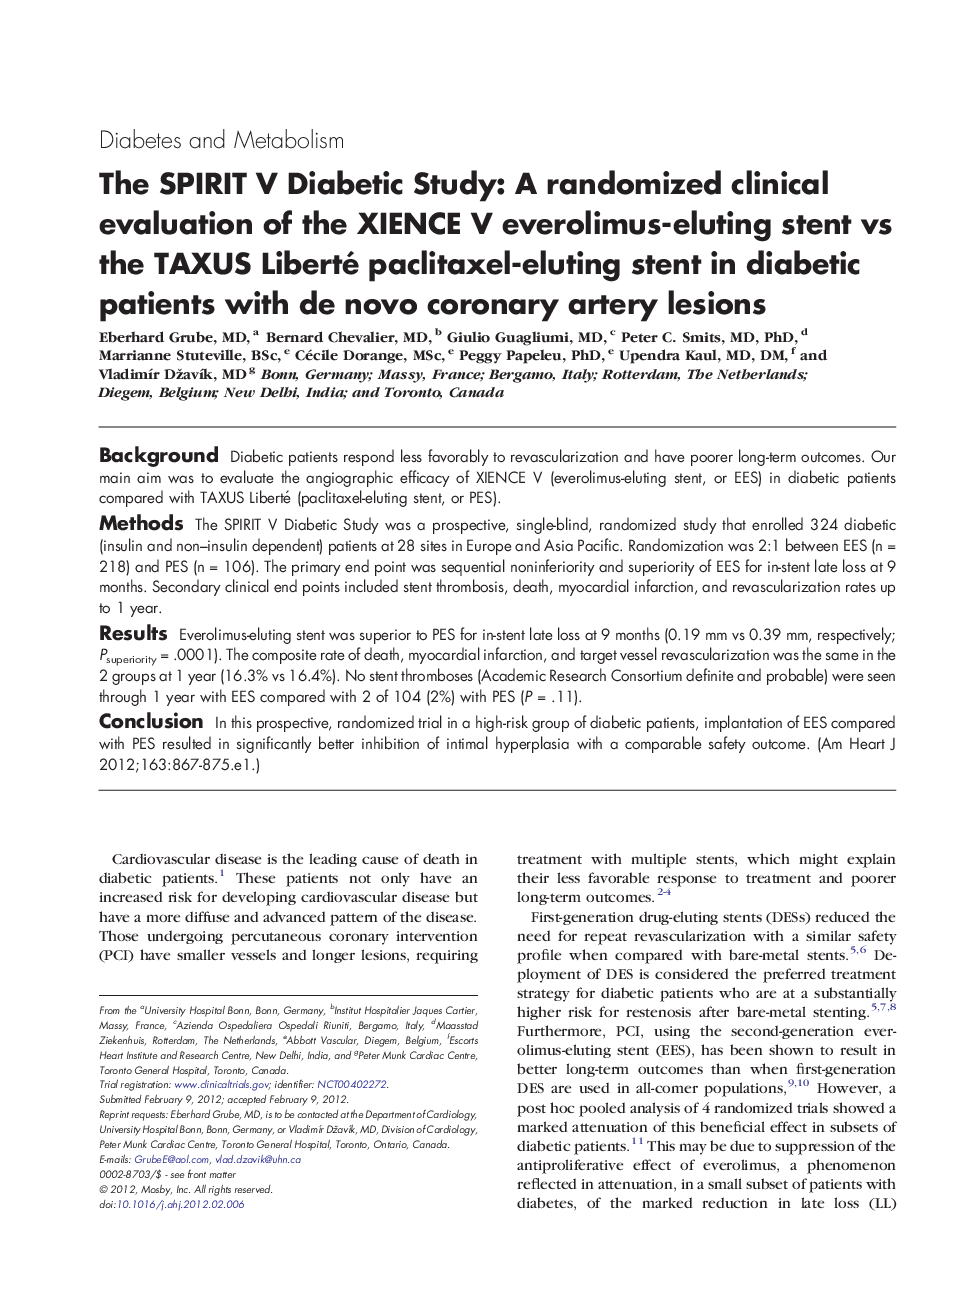 The SPIRIT V Diabetic Study: A randomized clinical evaluation of the XIENCE V everolimus-eluting stent vs the TAXUS Liberté paclitaxel-eluting stent in diabetic patients with de novo coronary artery lesions